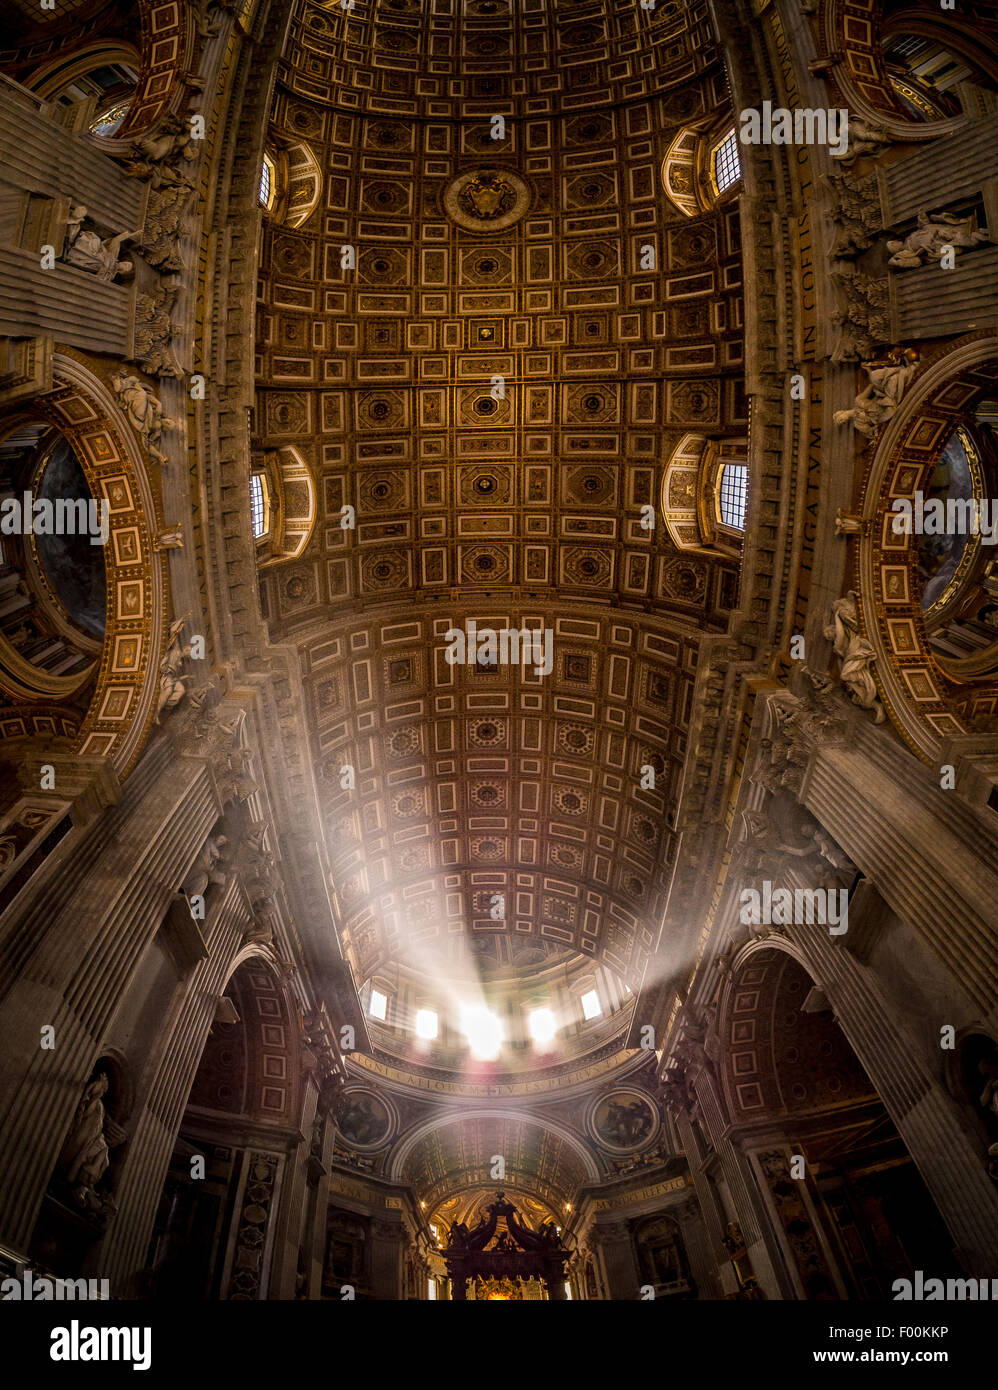 Shafts of light in St Peter's Basilica. Vatican City, Rome. Italy. Stock Photo